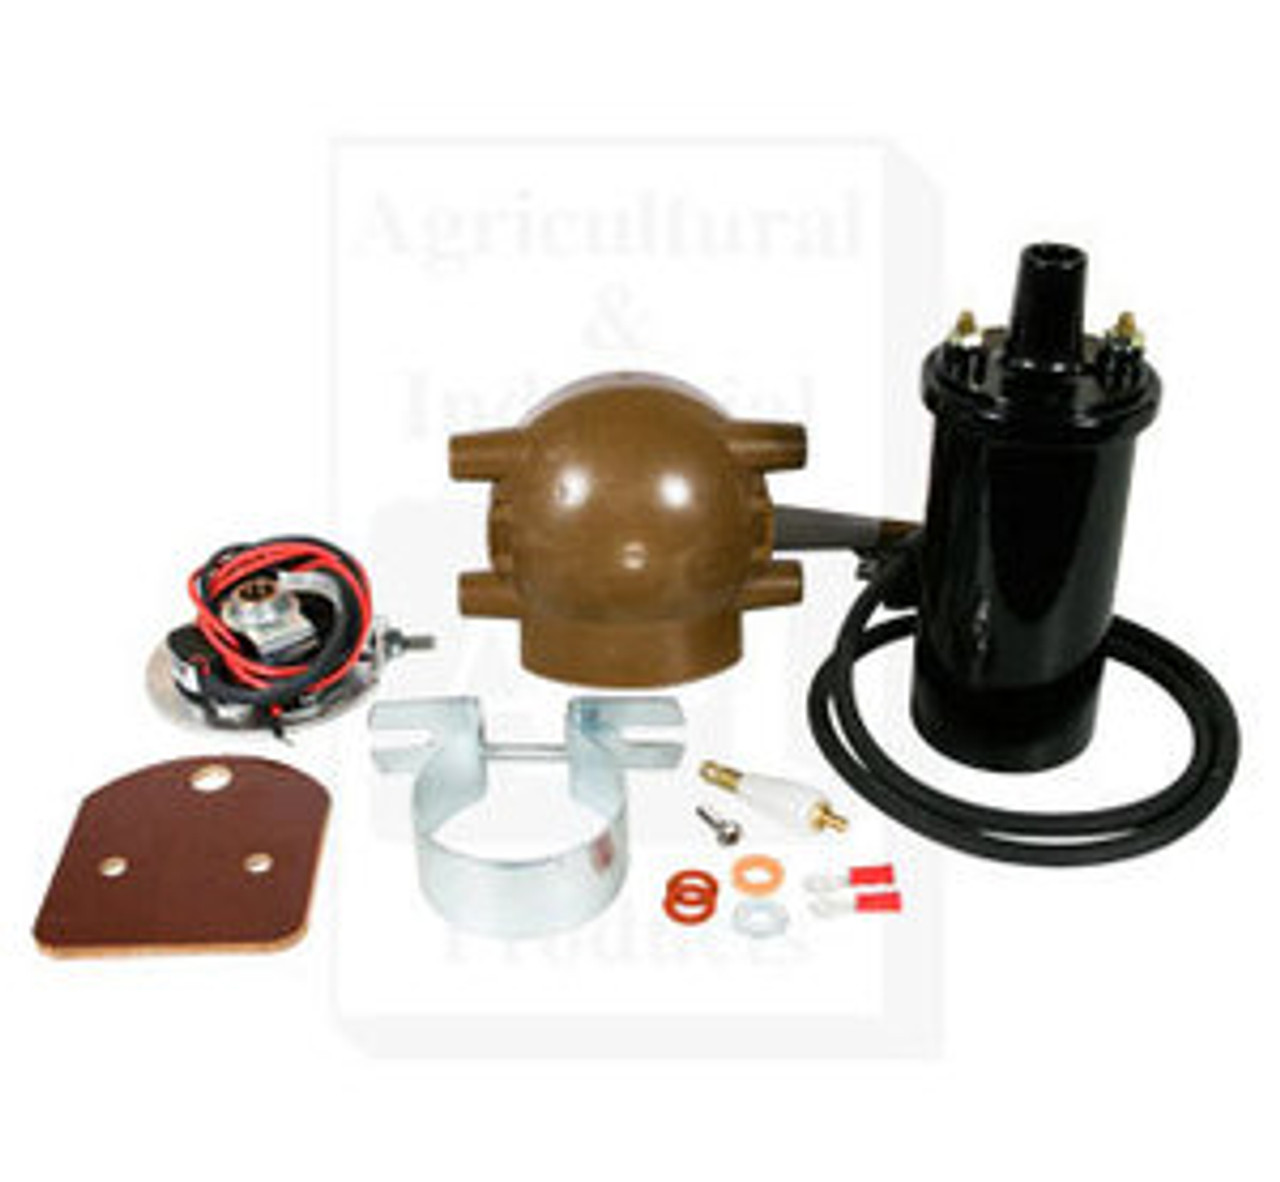 Ford Electronic Ignition Kit 6 Volt for 2N 8N and 9N